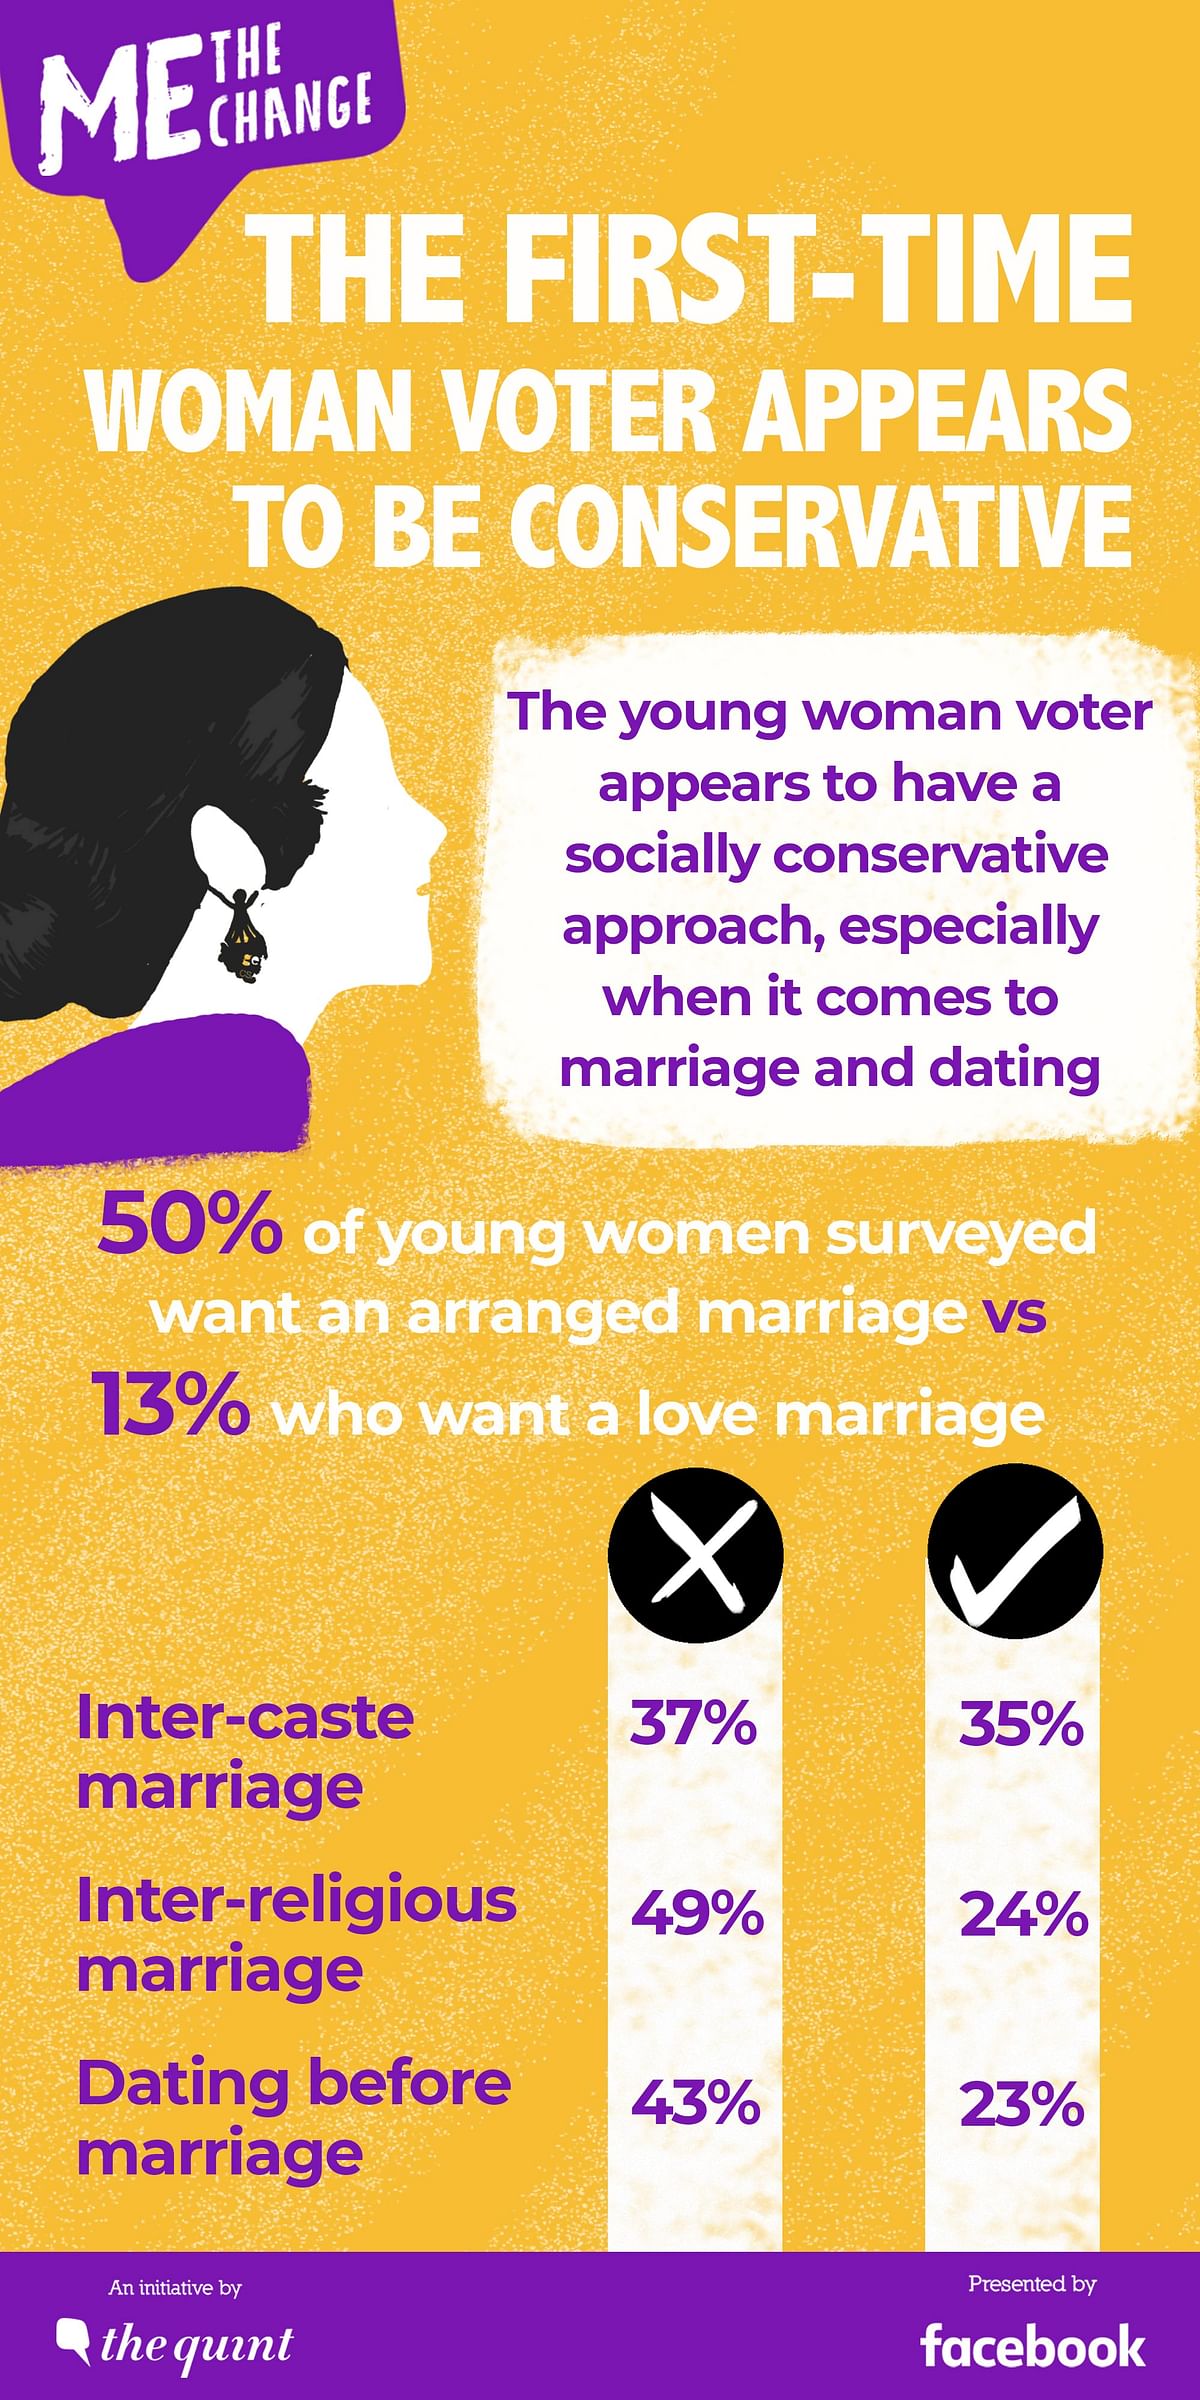 Data from the survey seems to show that India’s young women voters tend to be socially conservative.